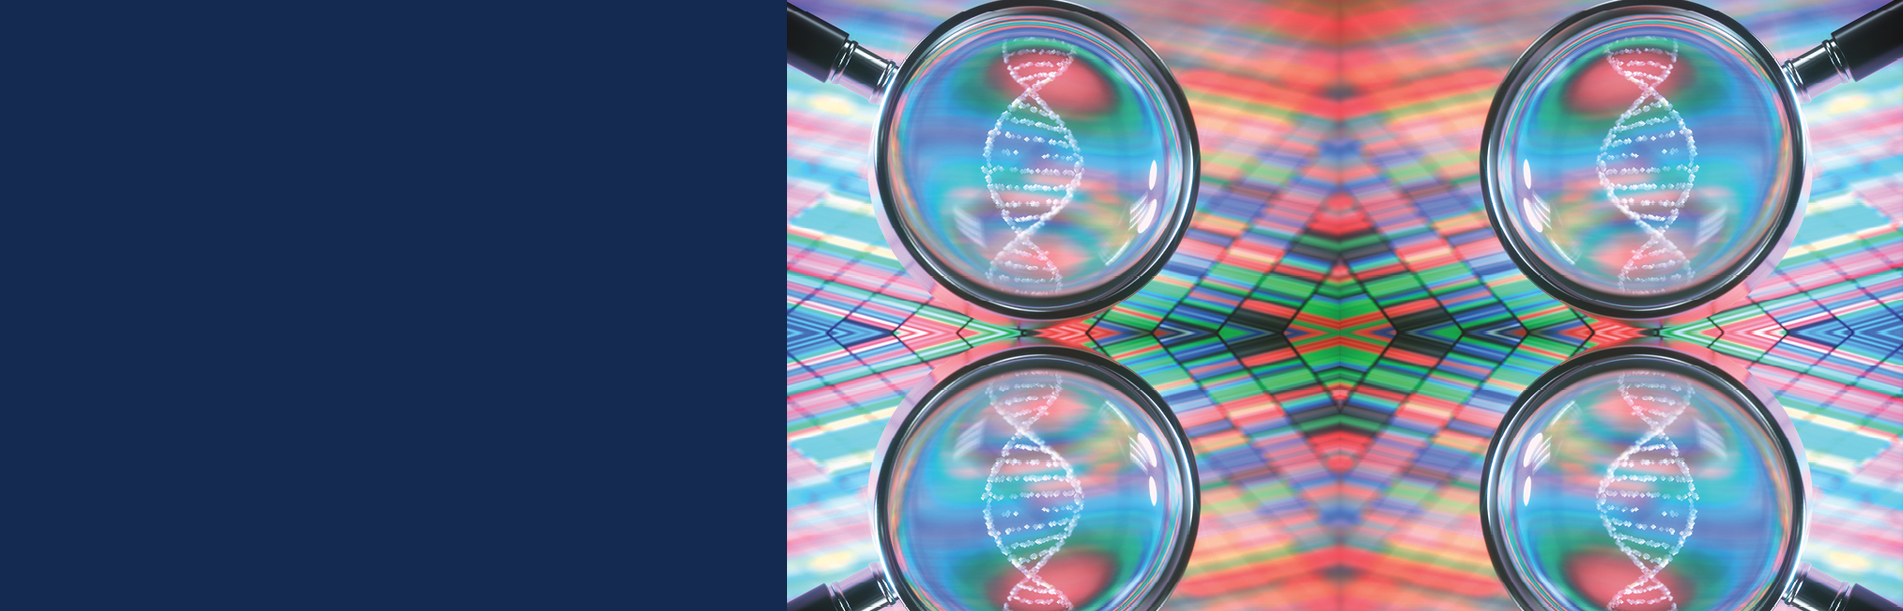 header with magnifying glass and dna helix